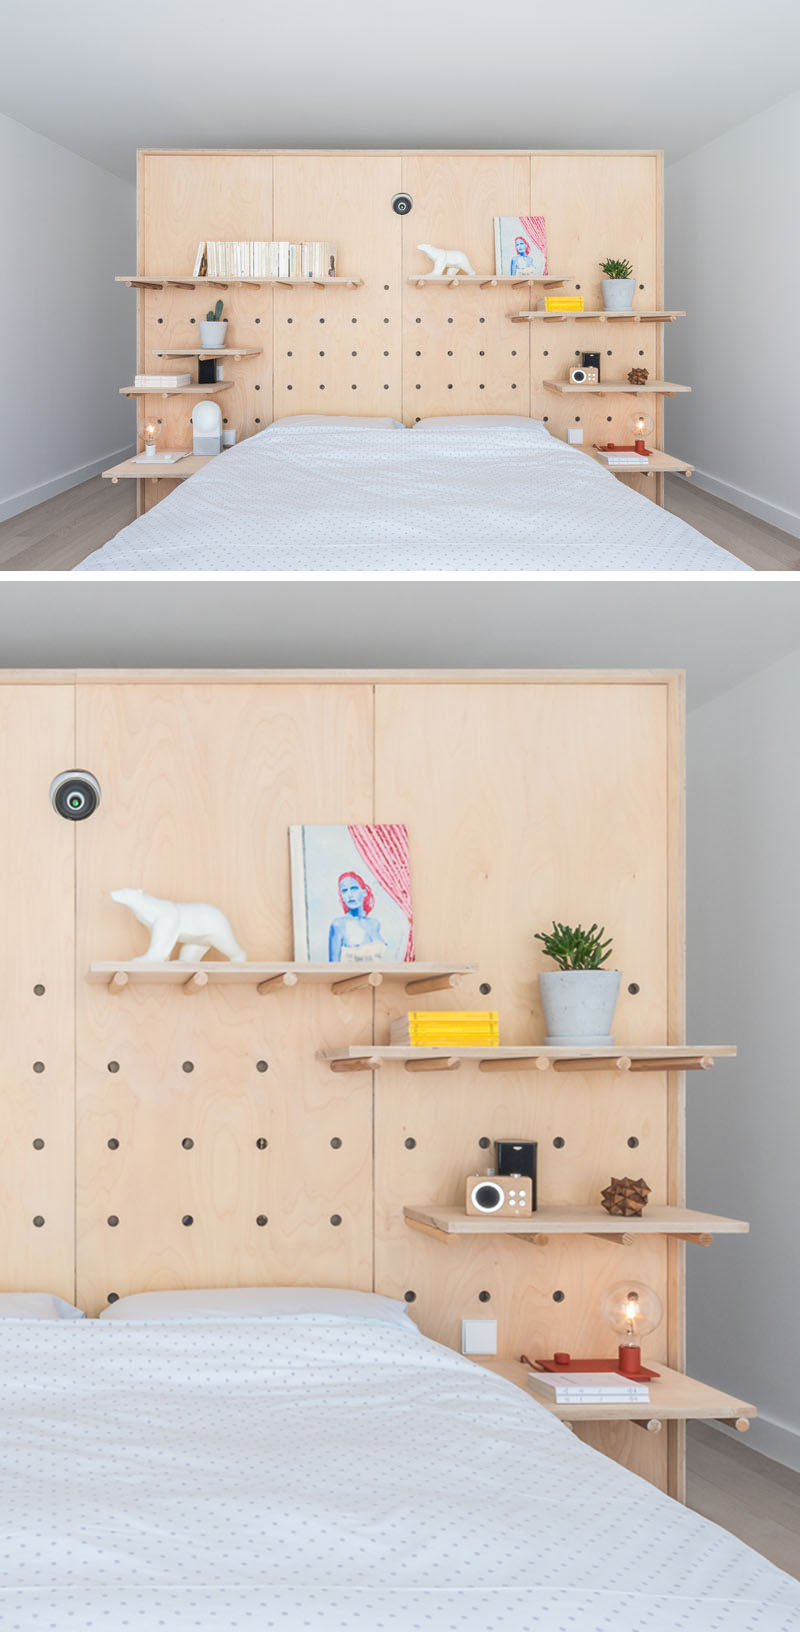 This modern apartment uses minimalist wood pegboard walls in the living room and master bedroom to create shelving for flexible displays and storage. #PegboardWall #Pegboard #InteriorDesign #Shelving